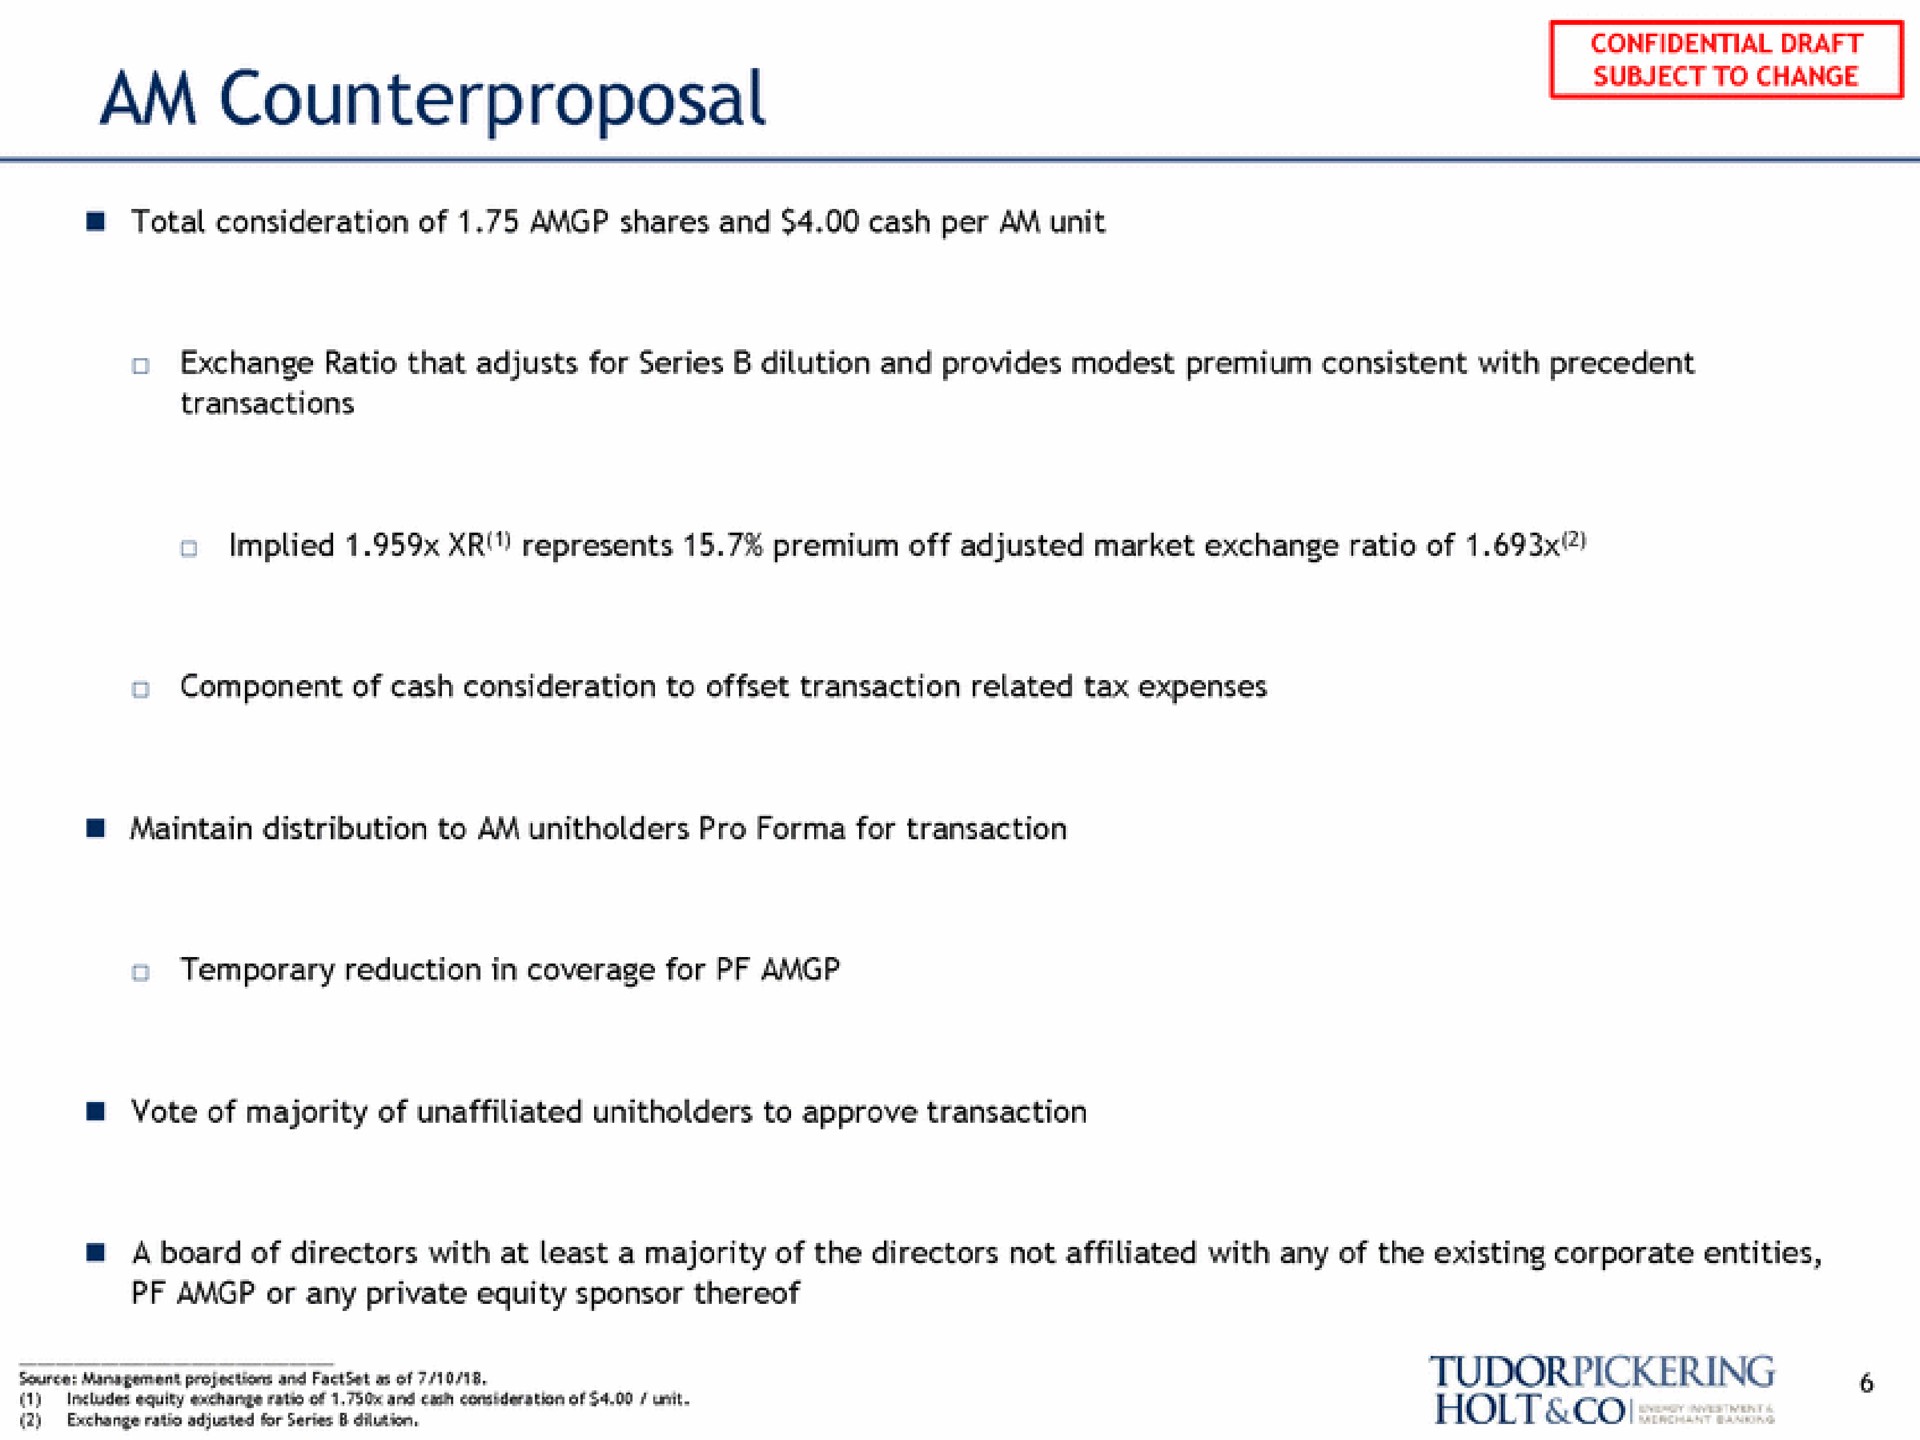 am counterproposal management projections and at of | Tudor, Pickering, Holt & Co